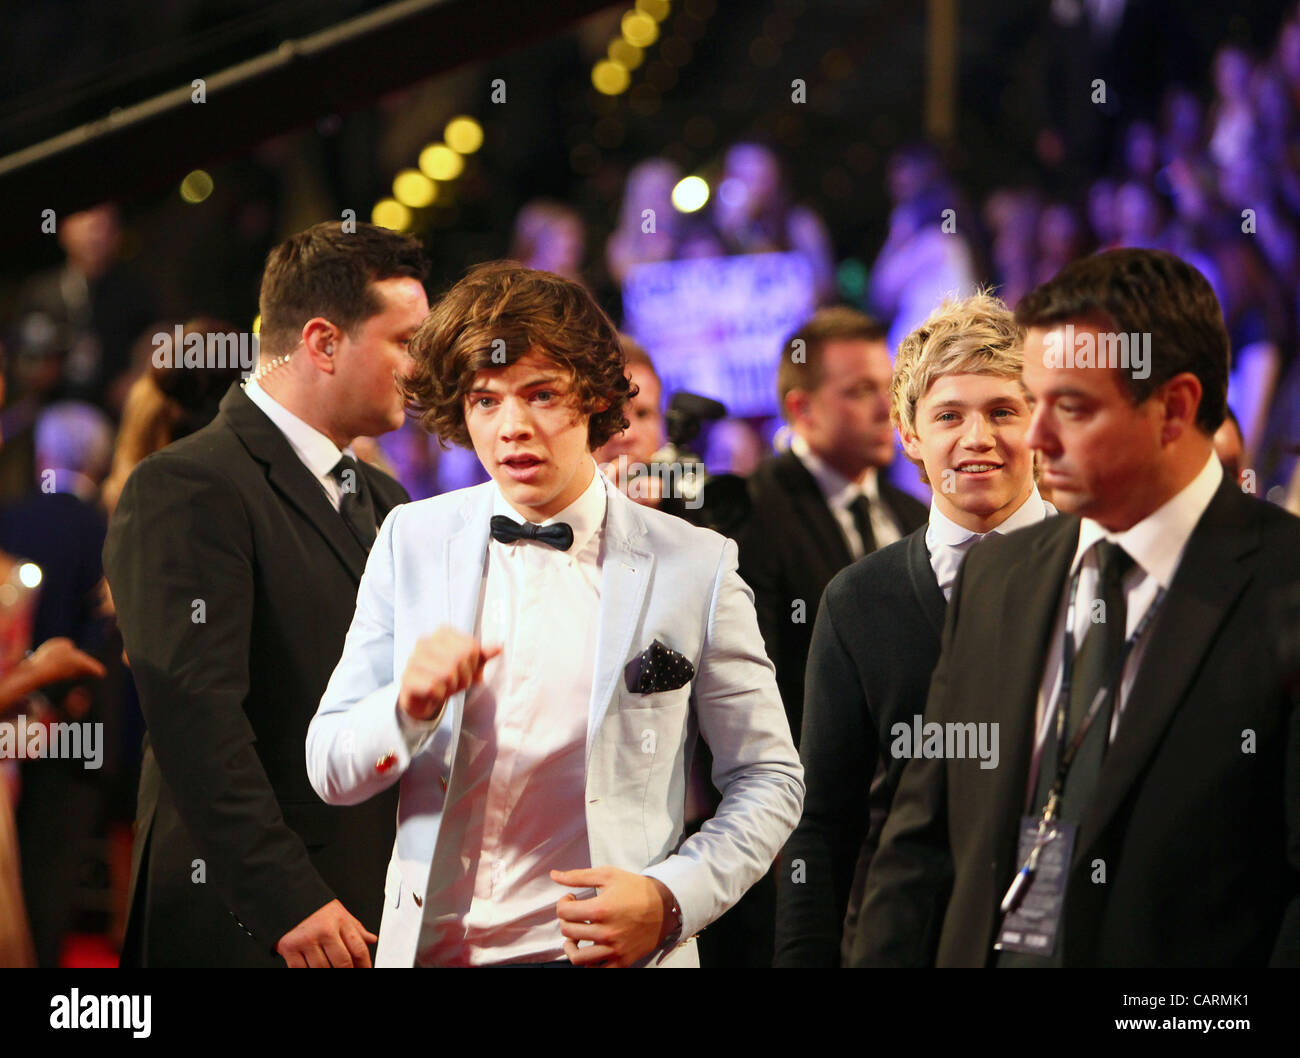 April 15, 2012 - Melbourne, NSW, Australia - HARRY STYLES and NIALL HORAN of the band One Direction arrive at the 2012 TV Week Logie Awards in Melbourne at the Crown Casino. (Credit Image: © Marianna Massey/ZUMAPRESS.com) Stock Photo